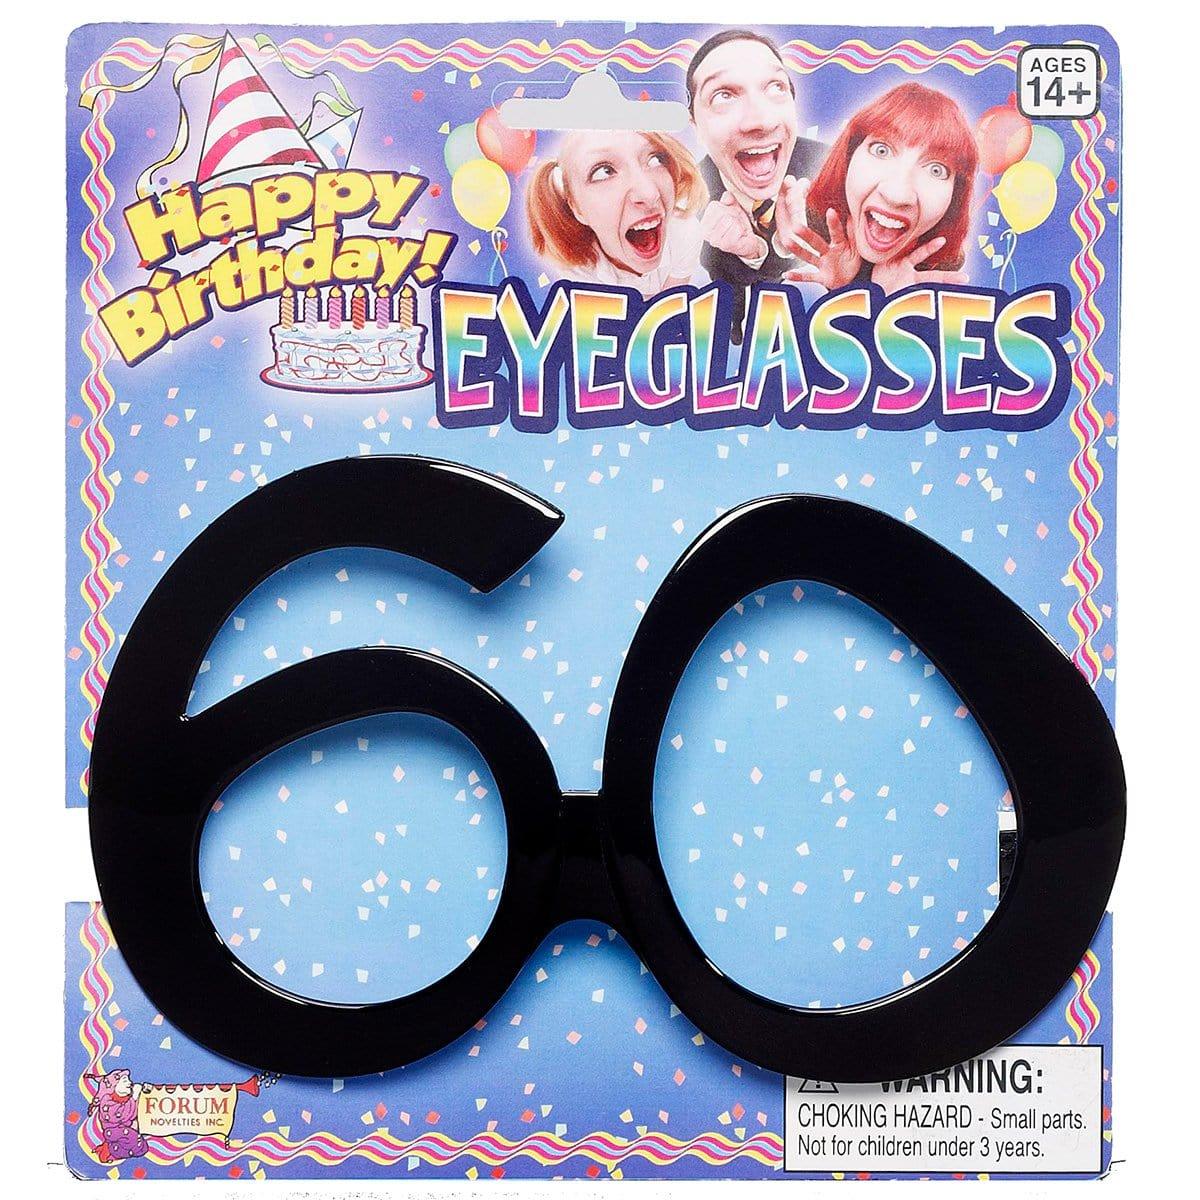 Buy Age Specific Birthday Glasses - 60th Birthday sold at Party Expert